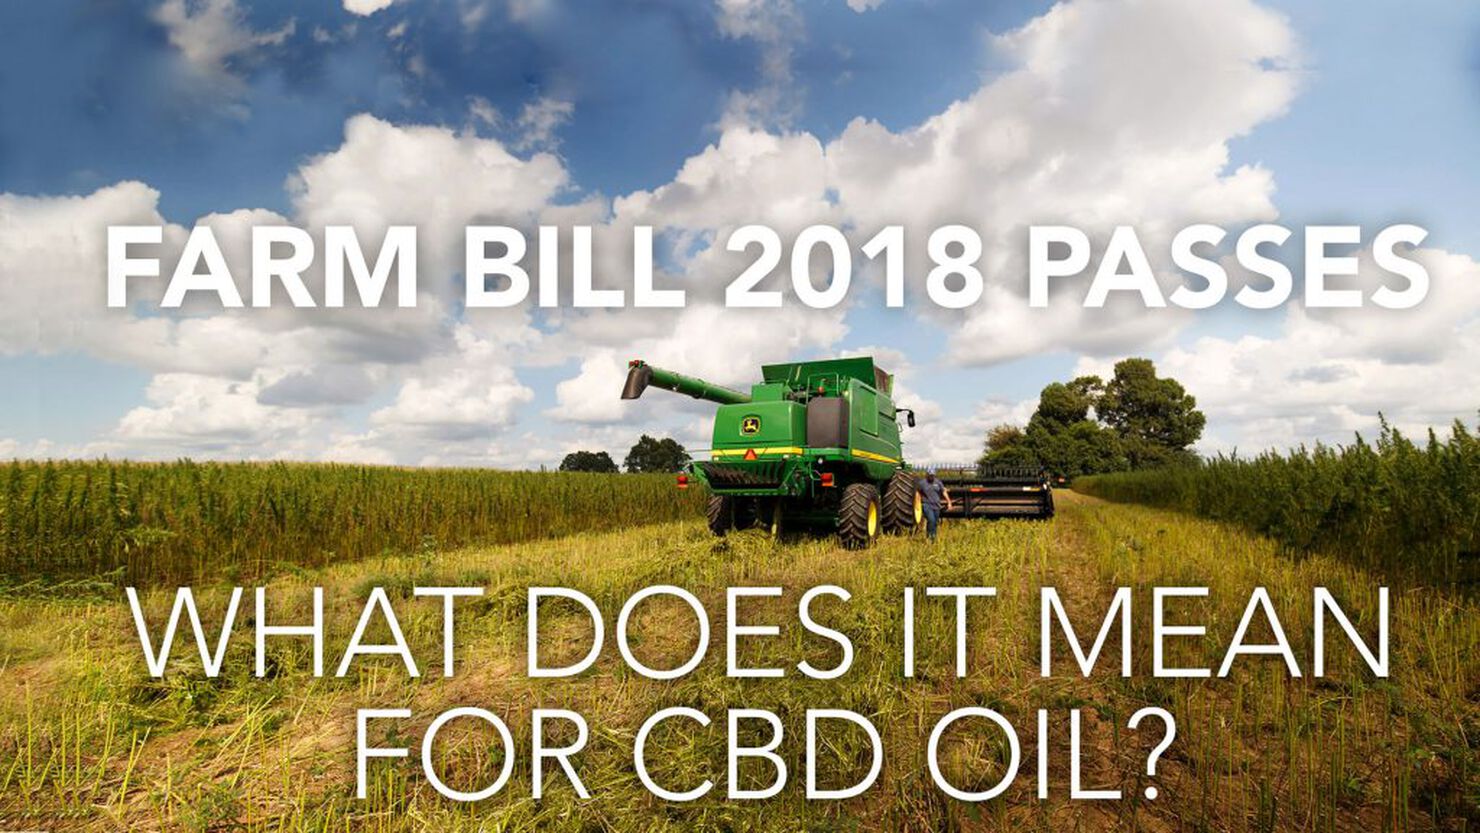 Farm Bill 2018 Passes – What Does It Mean for CBD Oil?